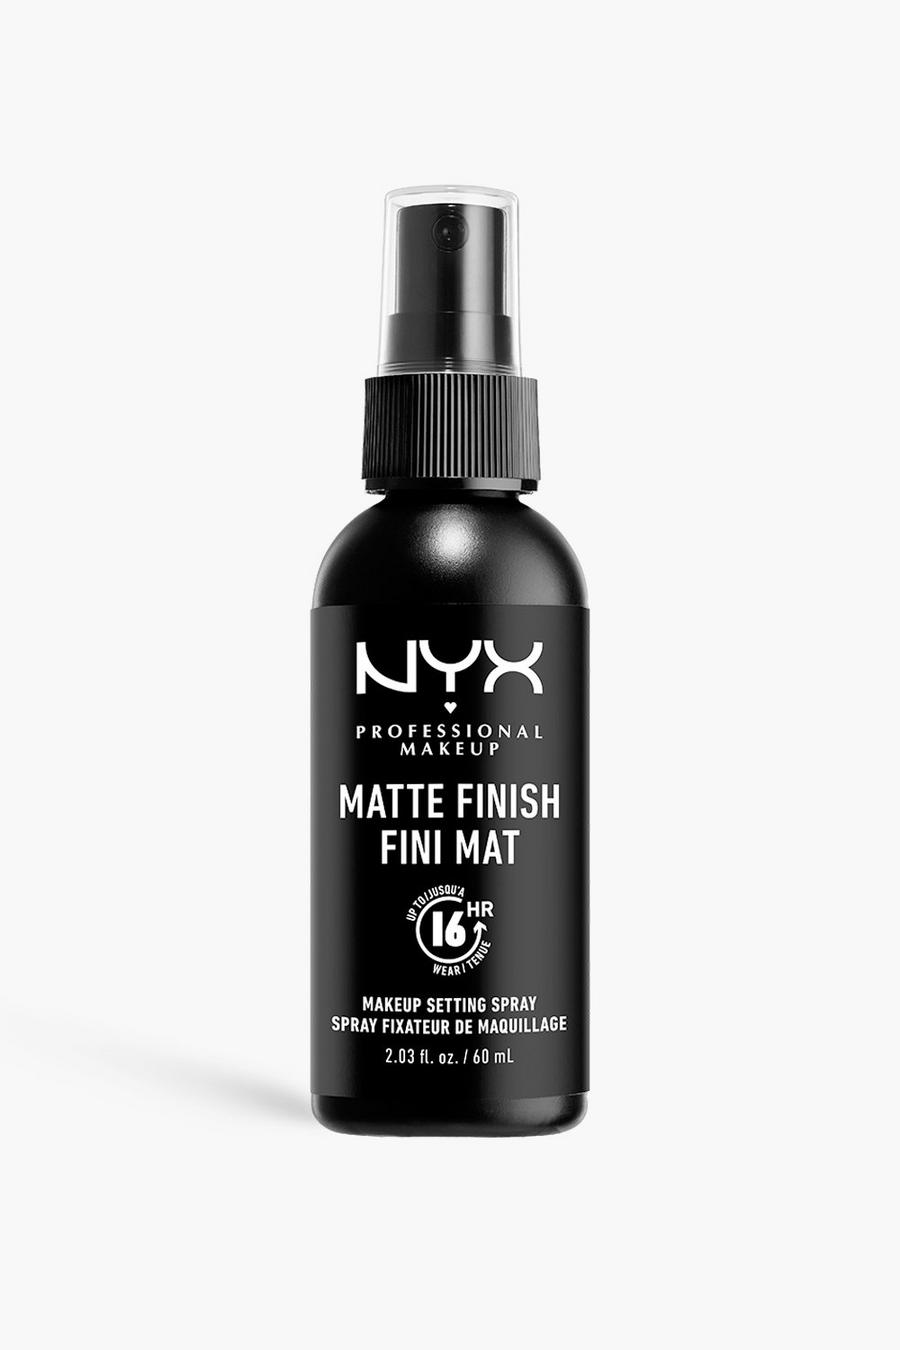 NYX Professional Makeup Makeup Spray fissante - Matte Long-lasting Shine Free Finish, Clear